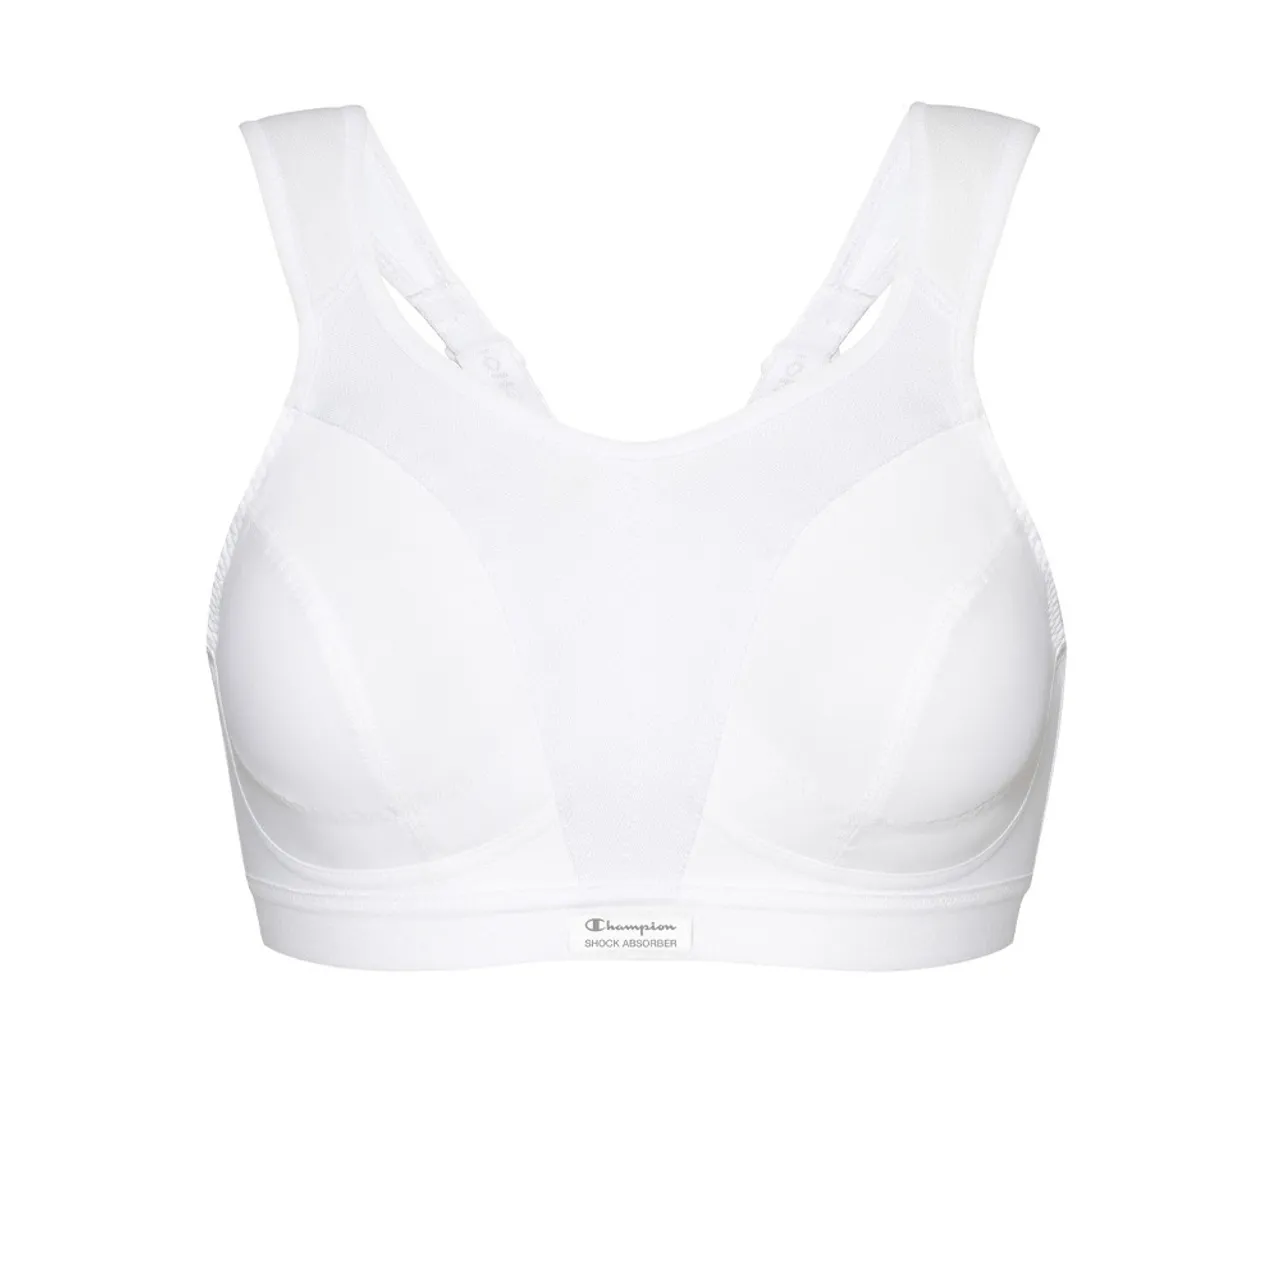 Shock Absorber Active Classic Support Sports Bra